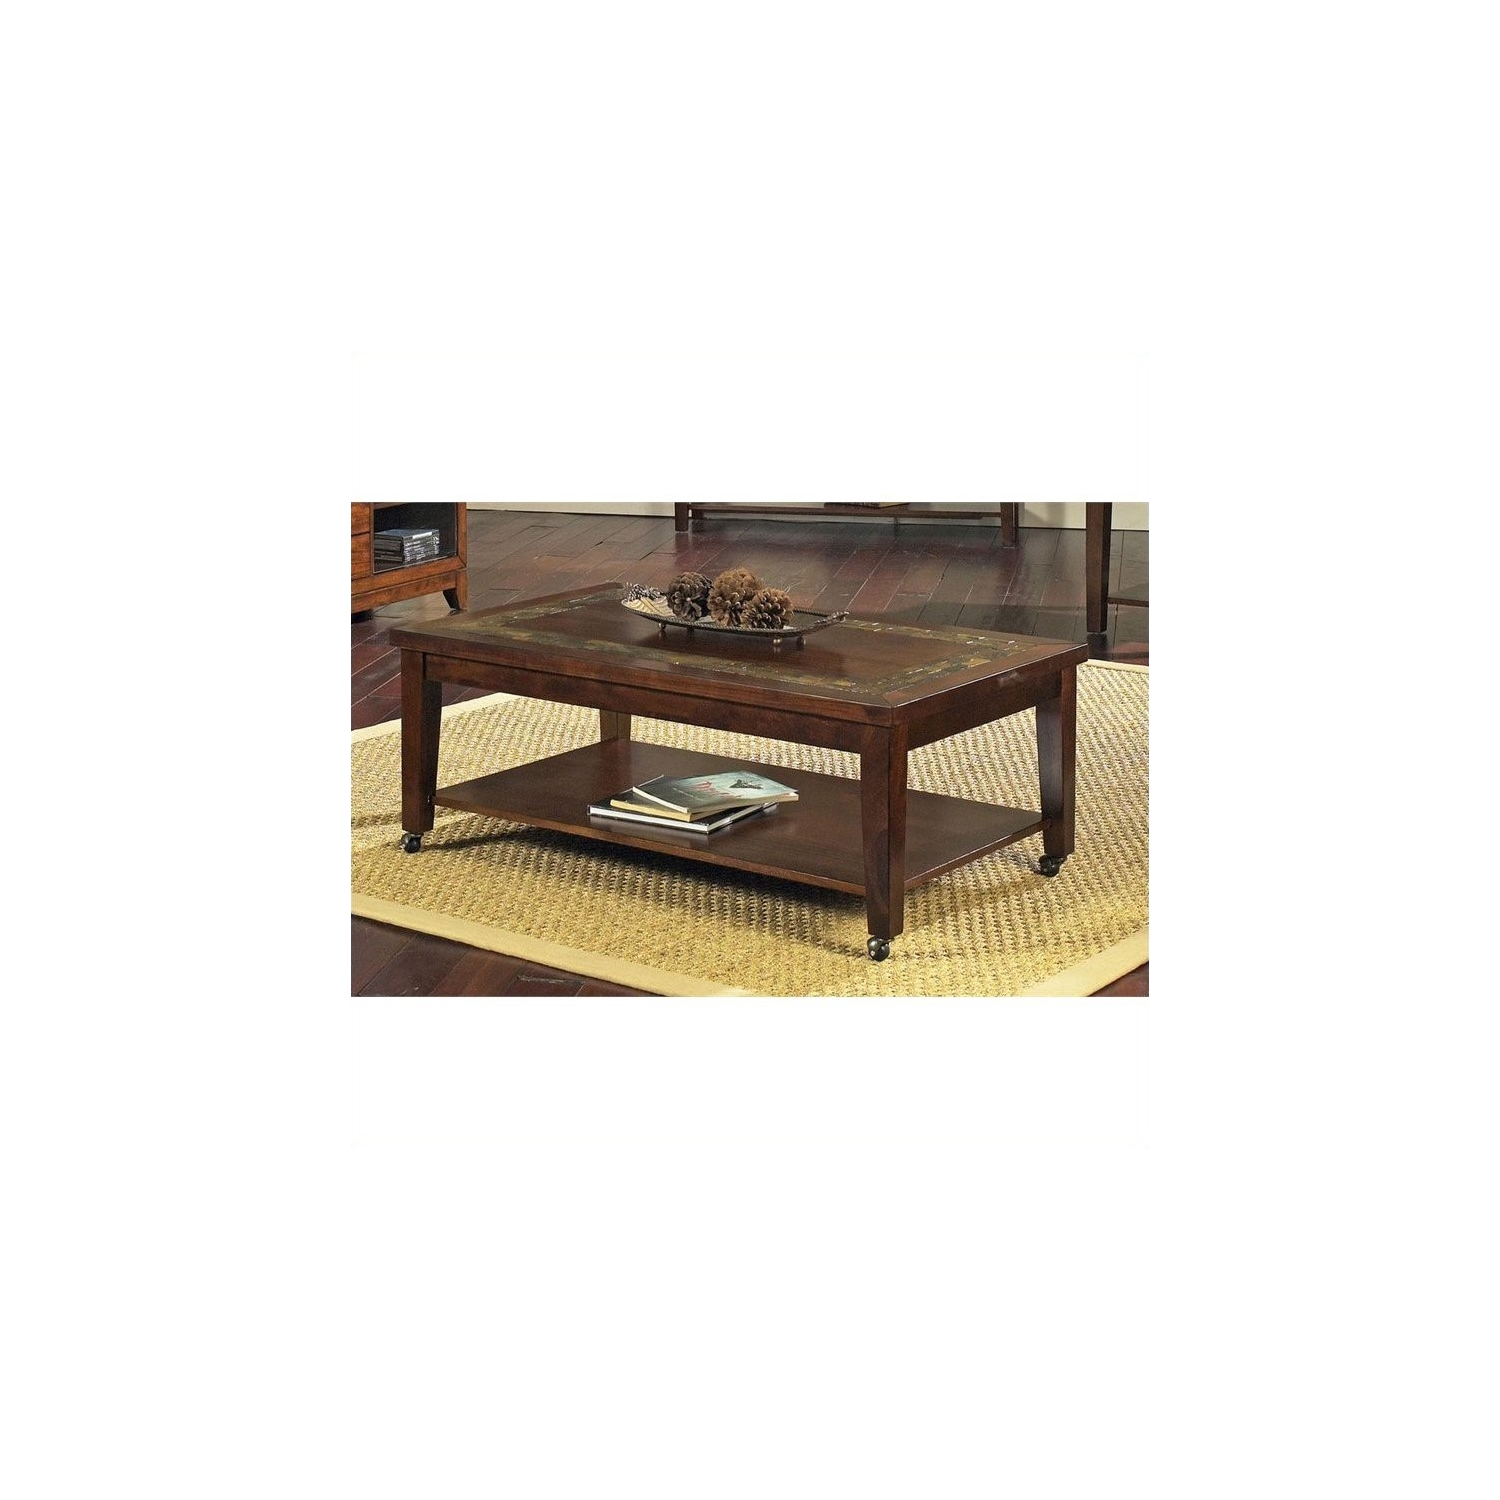 Davenport Slate Cocktail Table with Locking Casters with Brown Cherry Finish